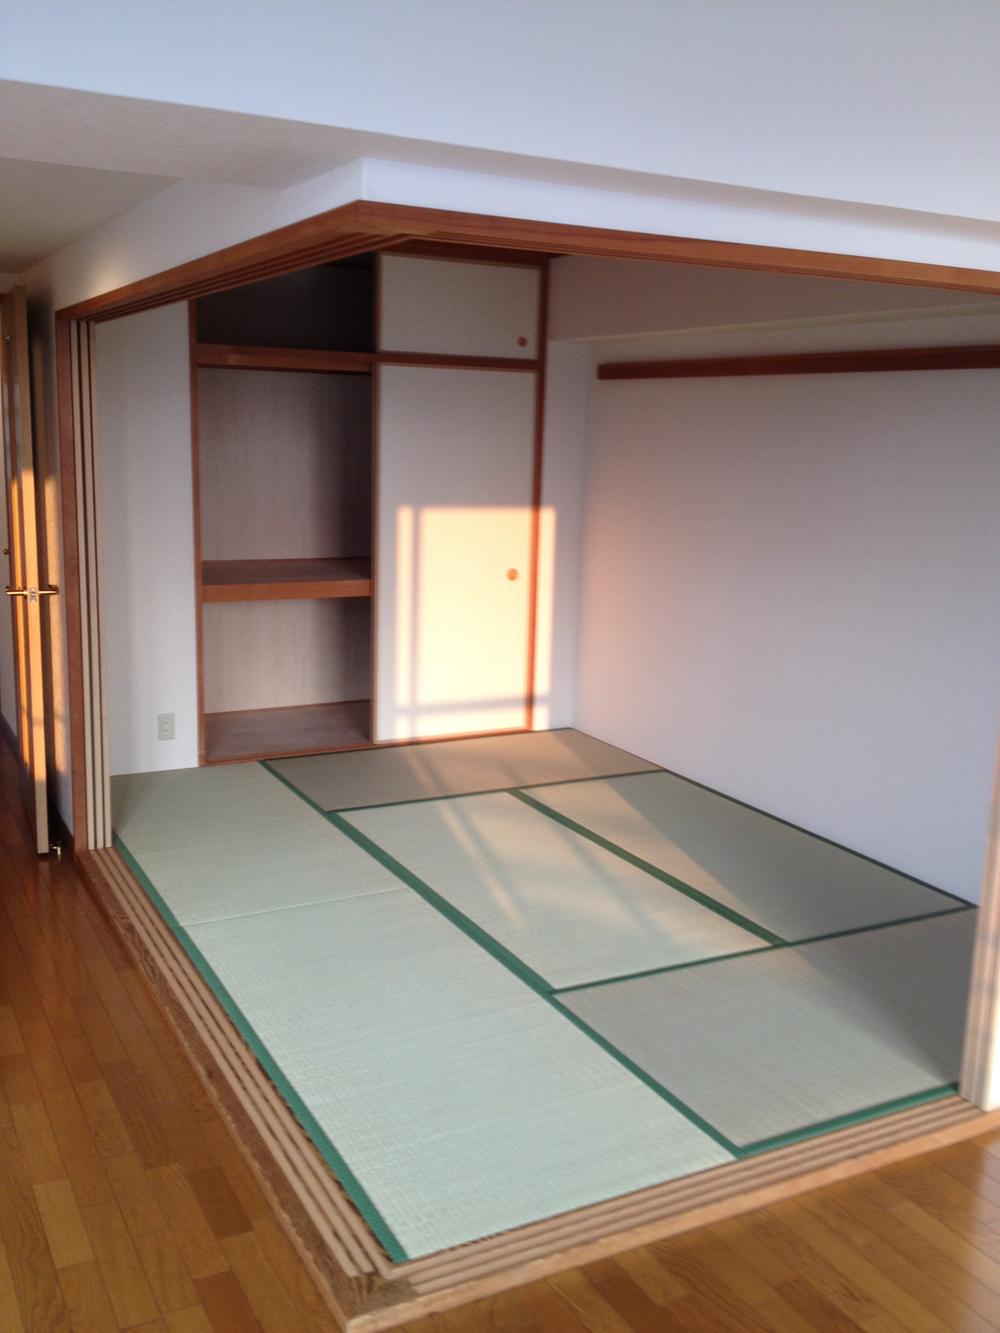 Other introspection. Japanese-style room (August 2013) Shooting